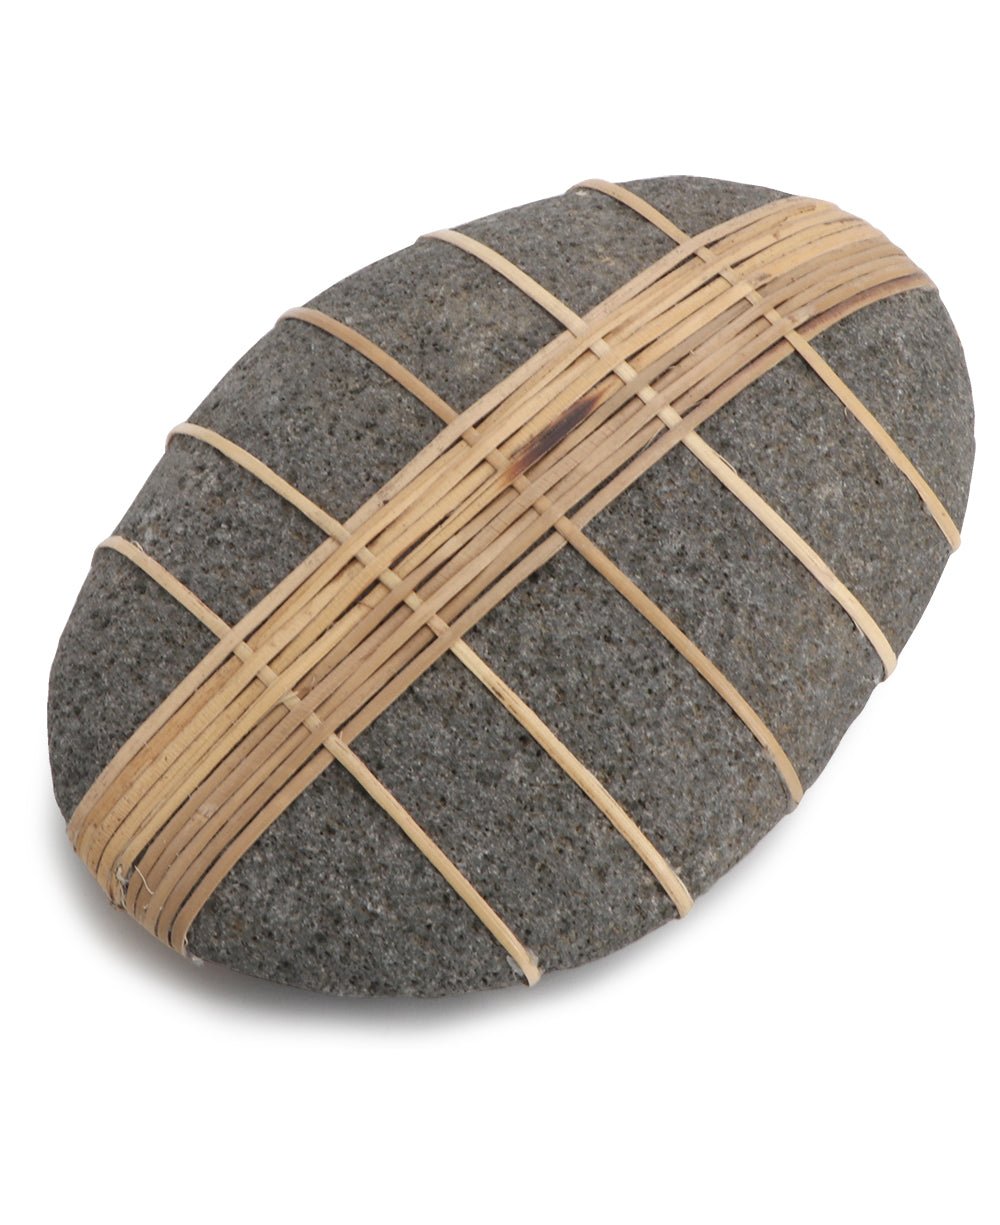 Decorative Zen Rocks With Rattan, Sold Individually - Home D